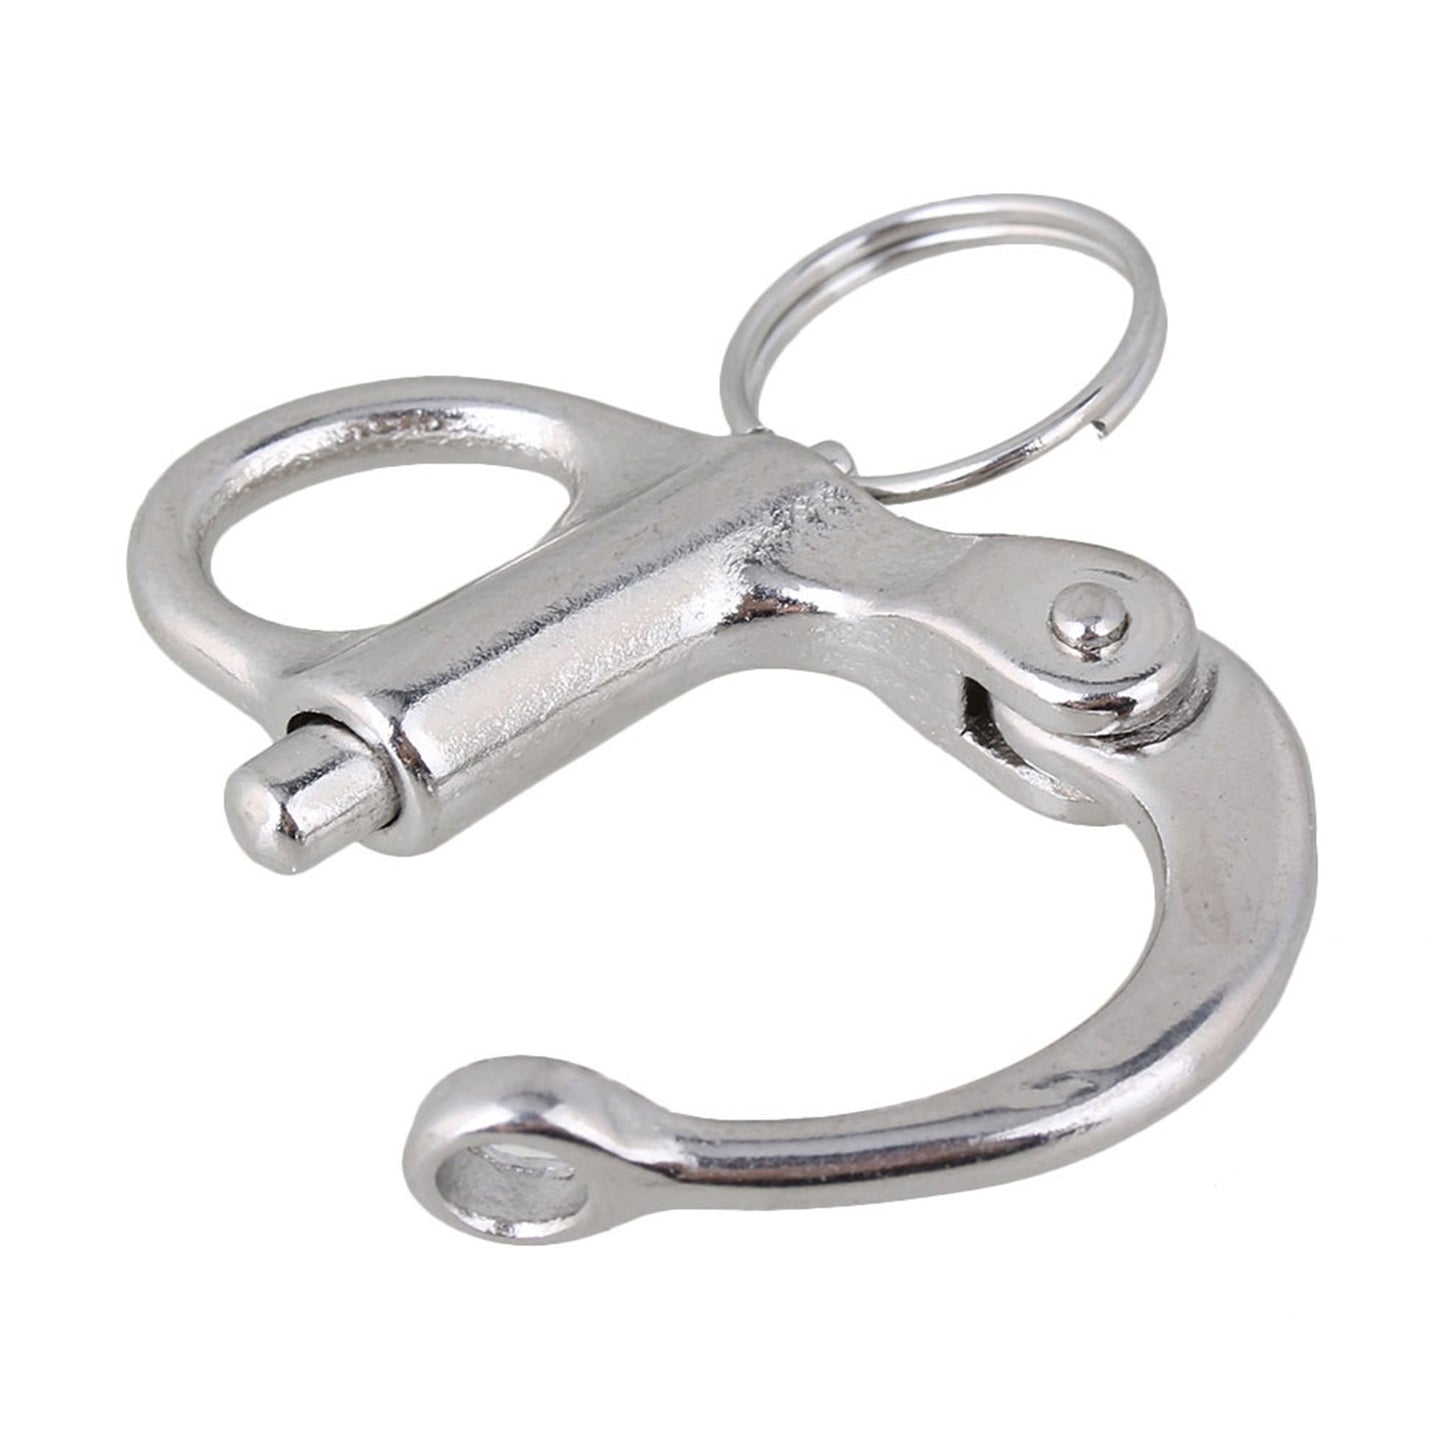 BQLZR 35mm Silver Stainless Steel Fixed Bail Snap Shackle Rigging Sailing Boat Yacht Marine Hard Set of 10